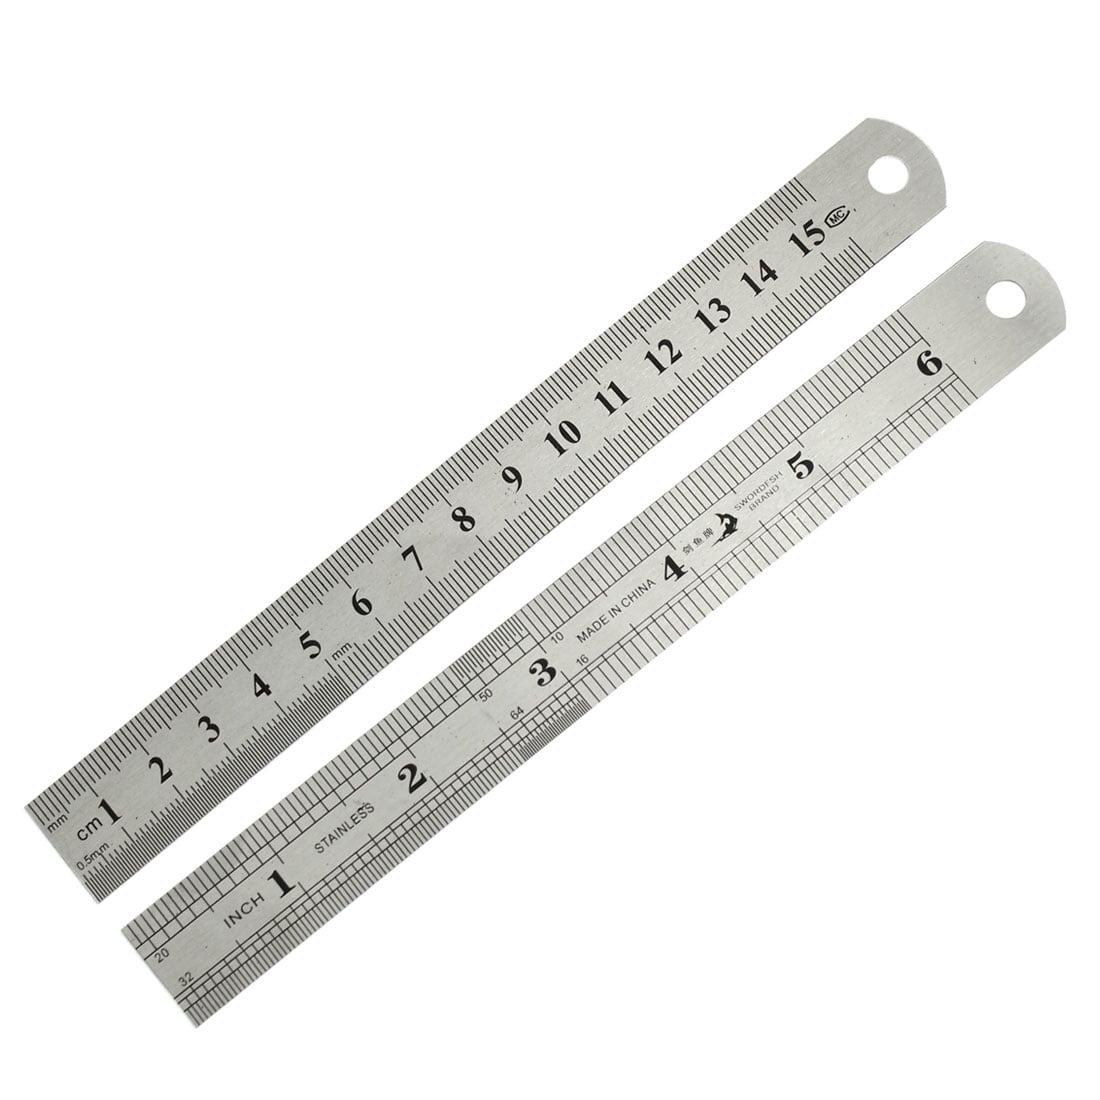 2pcs 15cm/30cm Stainless Steel Straight Ruler Precision Scale Double Sided Tool